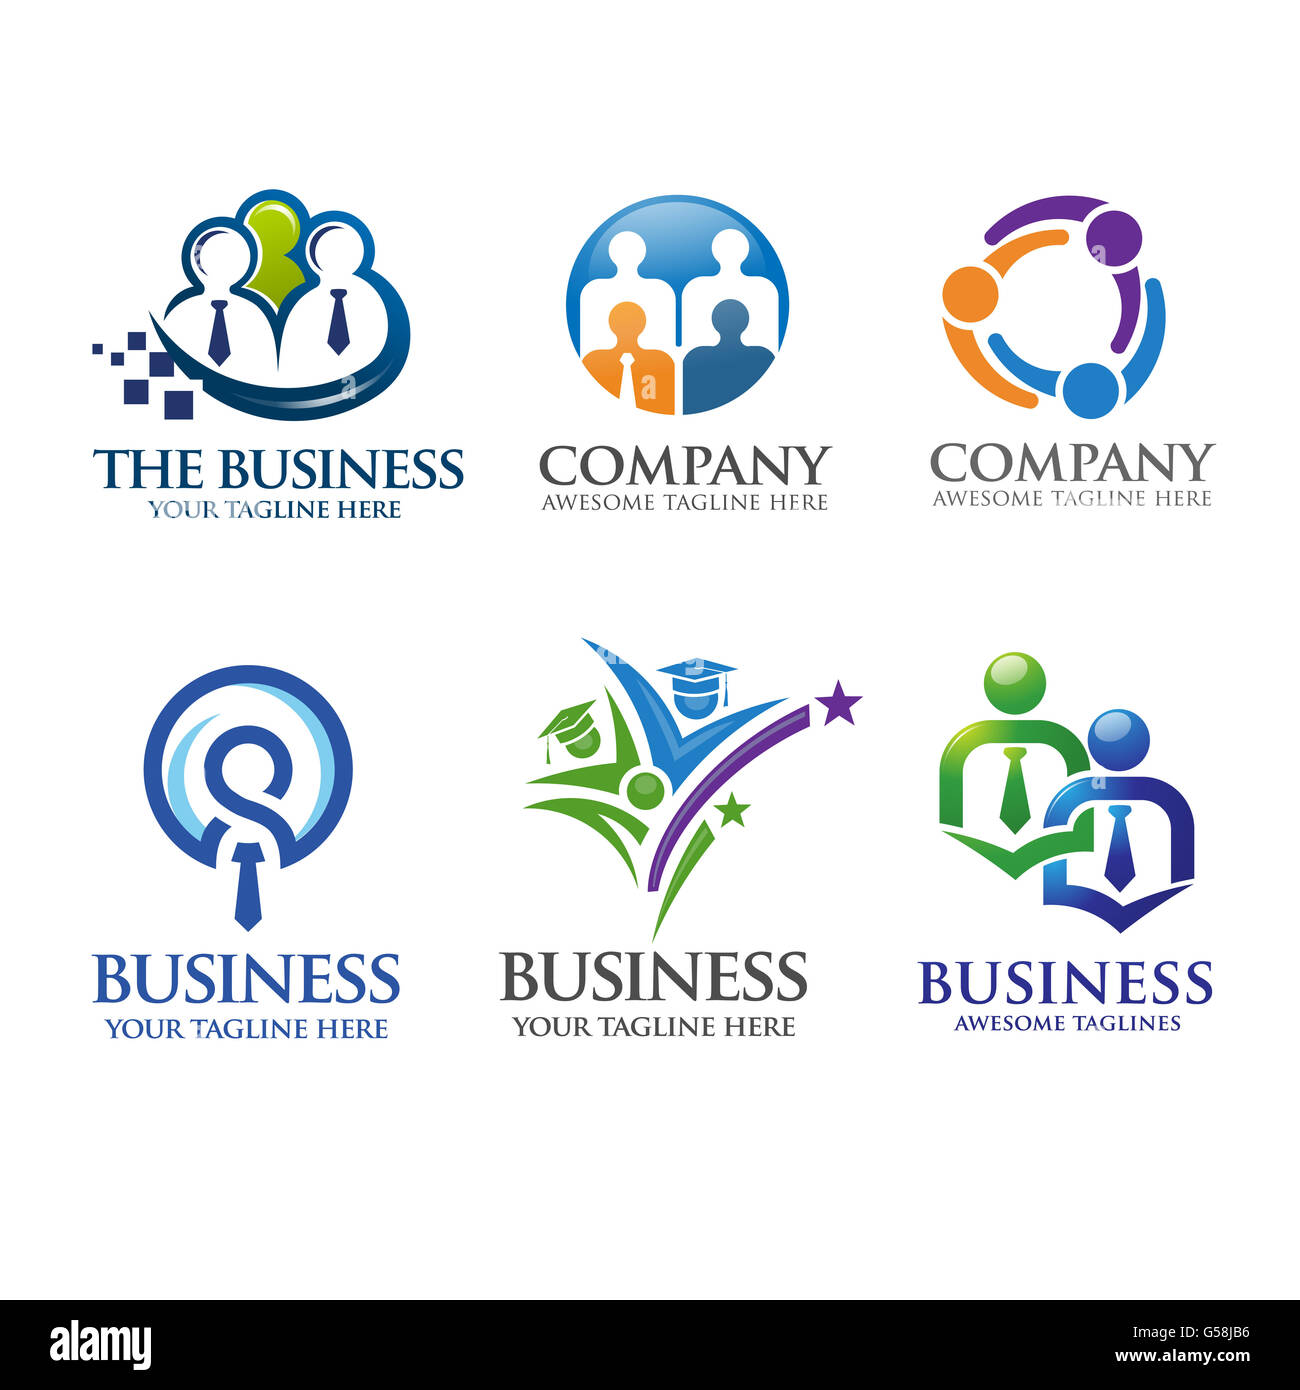 elegant concept people business and leadership logo vector set Stock Photo